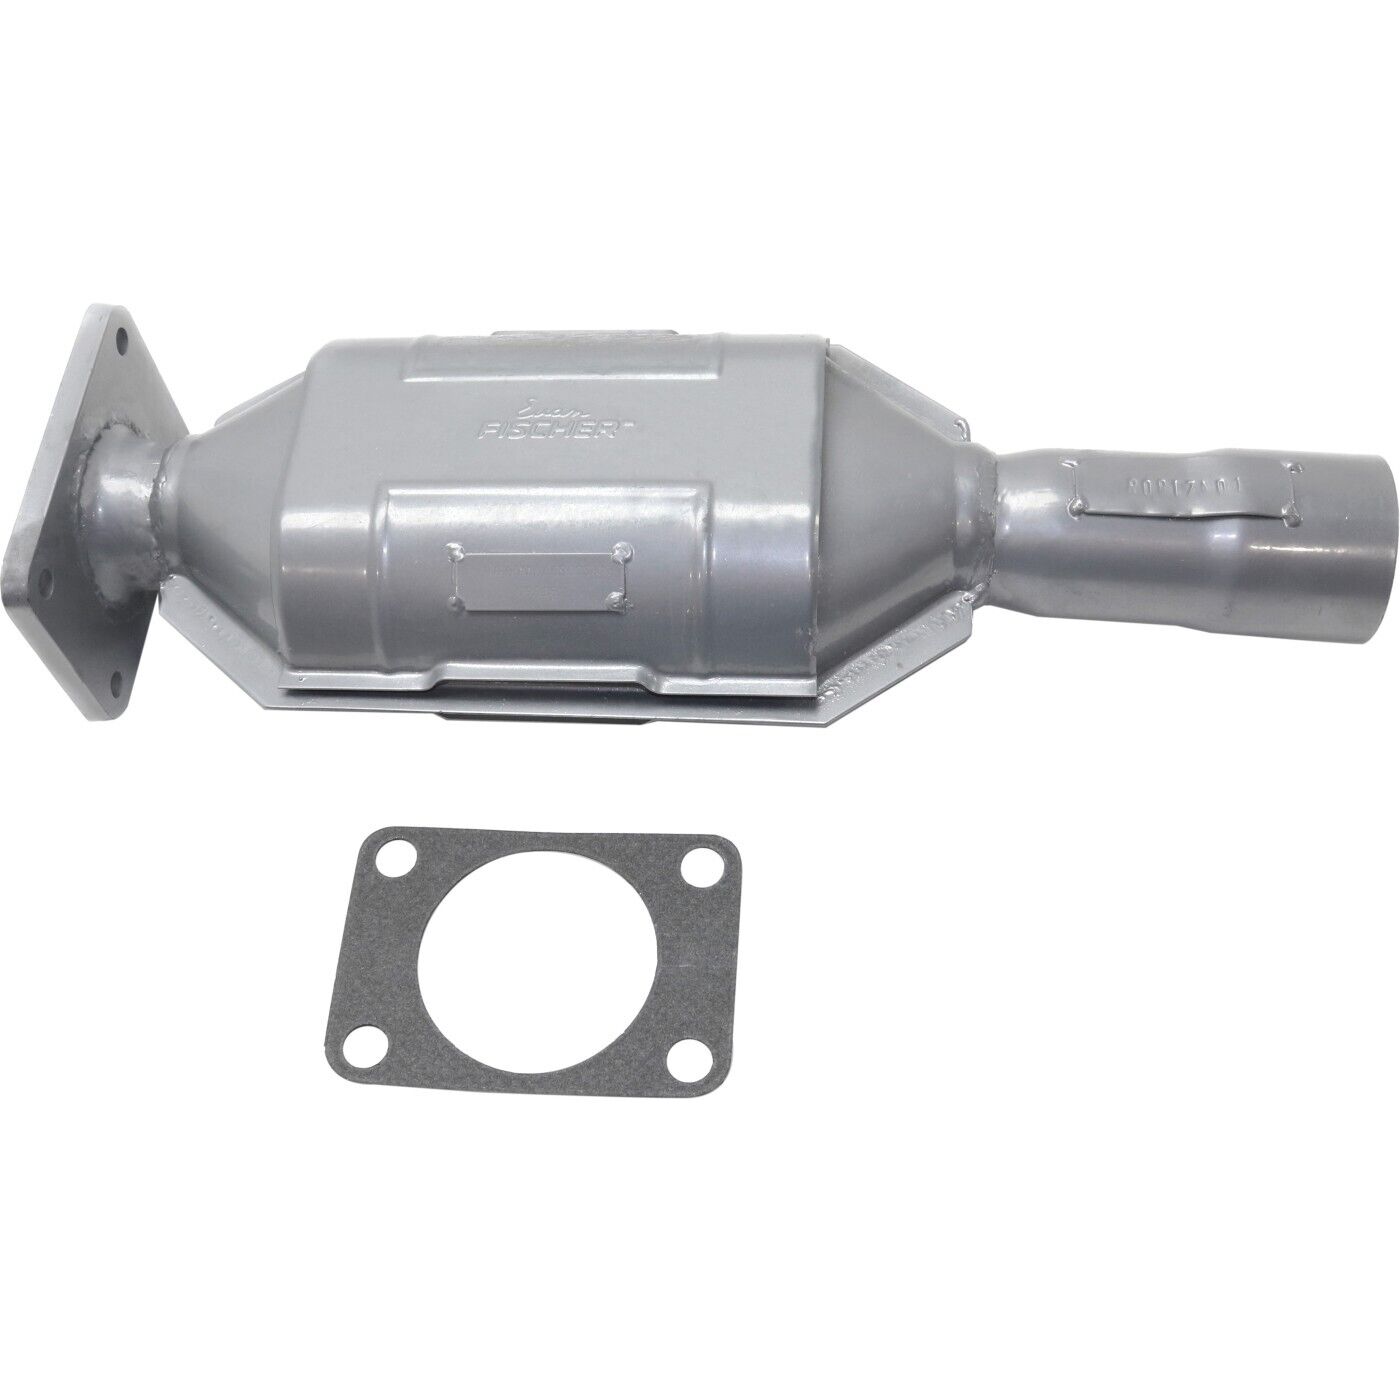 Catalytic Converter Fits 2006-2011 Buick Lucerne and Cadillac DTS 4.6L Engine